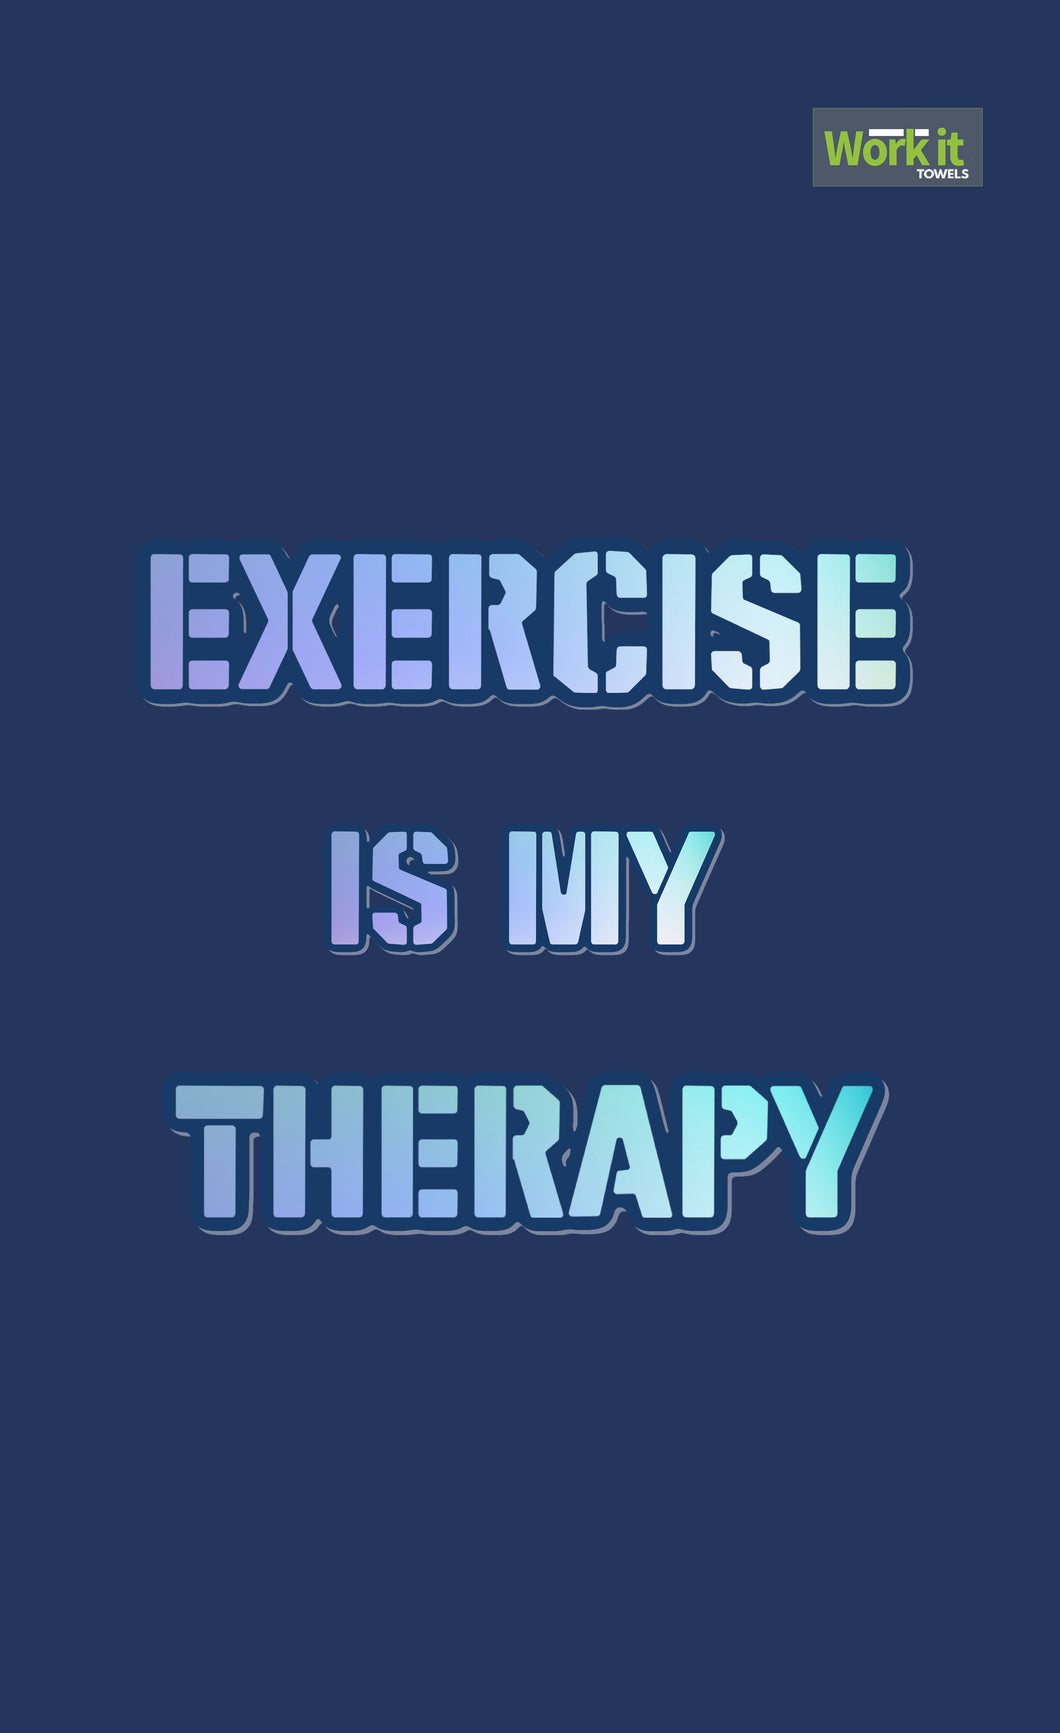 Exercise is my Therapy - work it towels